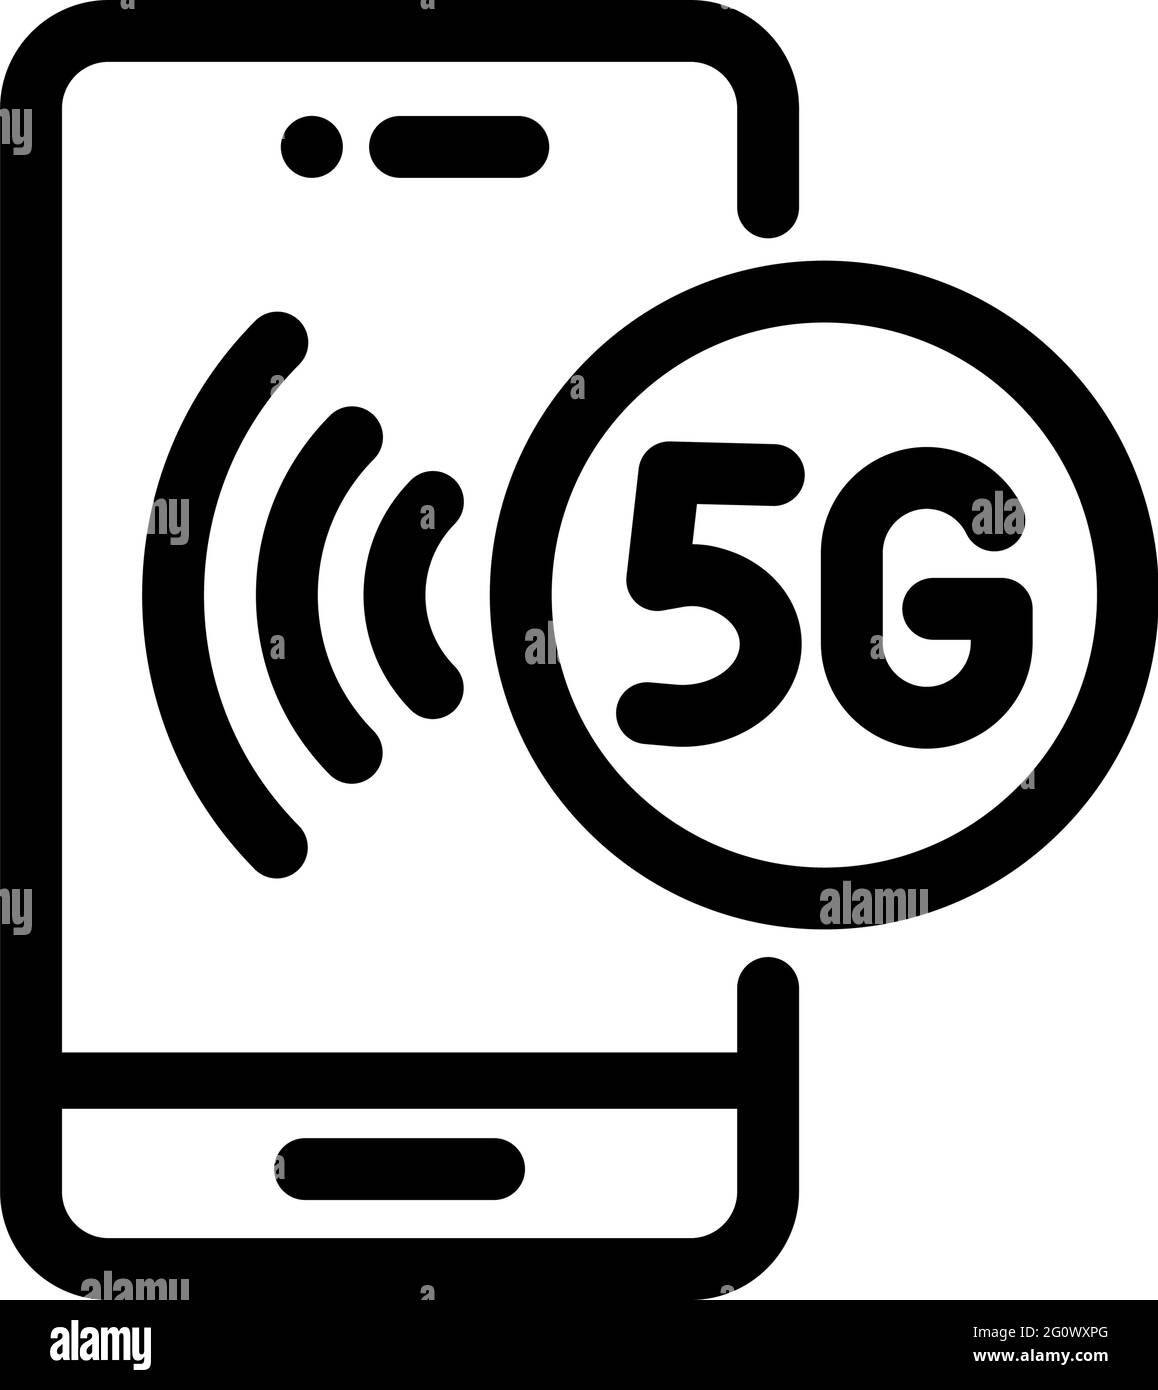 5g line vector icon. Network internet connection symbol or logo. Stock vector illustration Stock Vector